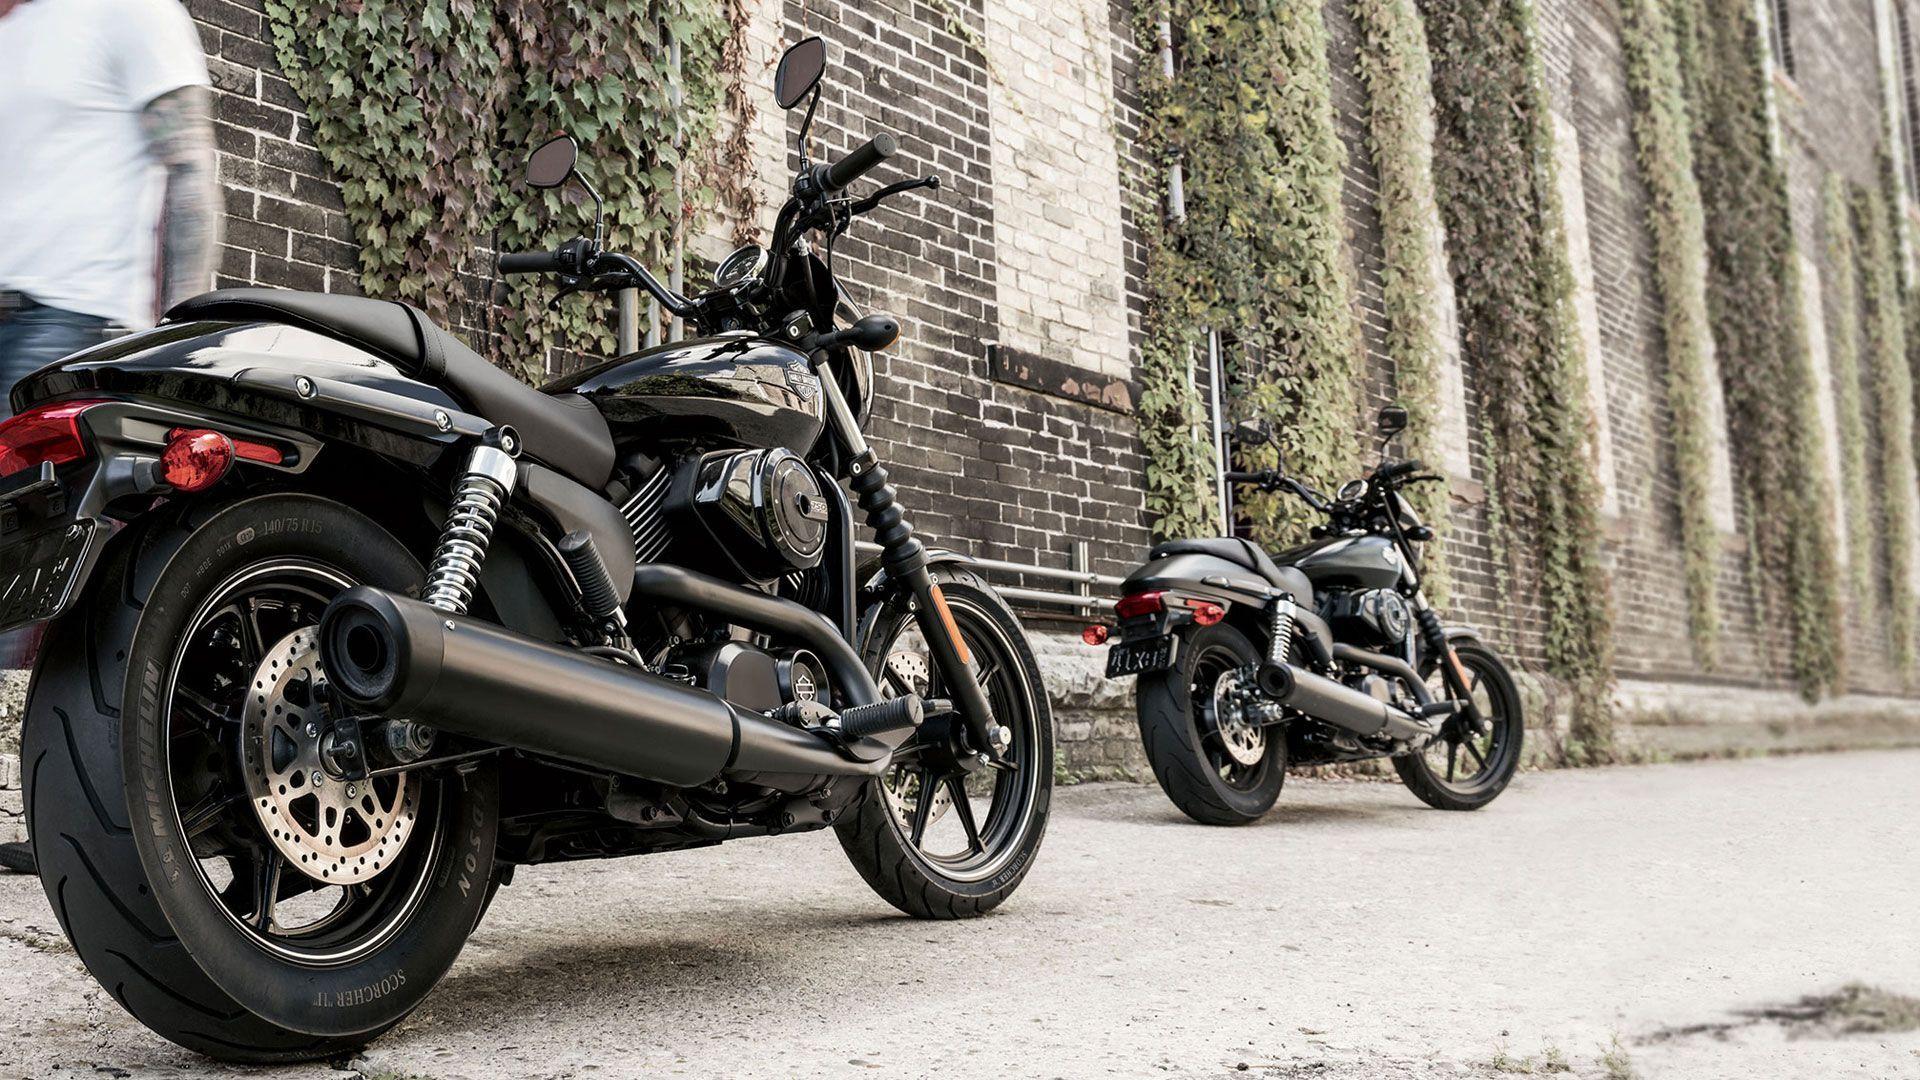 Harley Davidson Issues Recall For Street 500 And Street 750